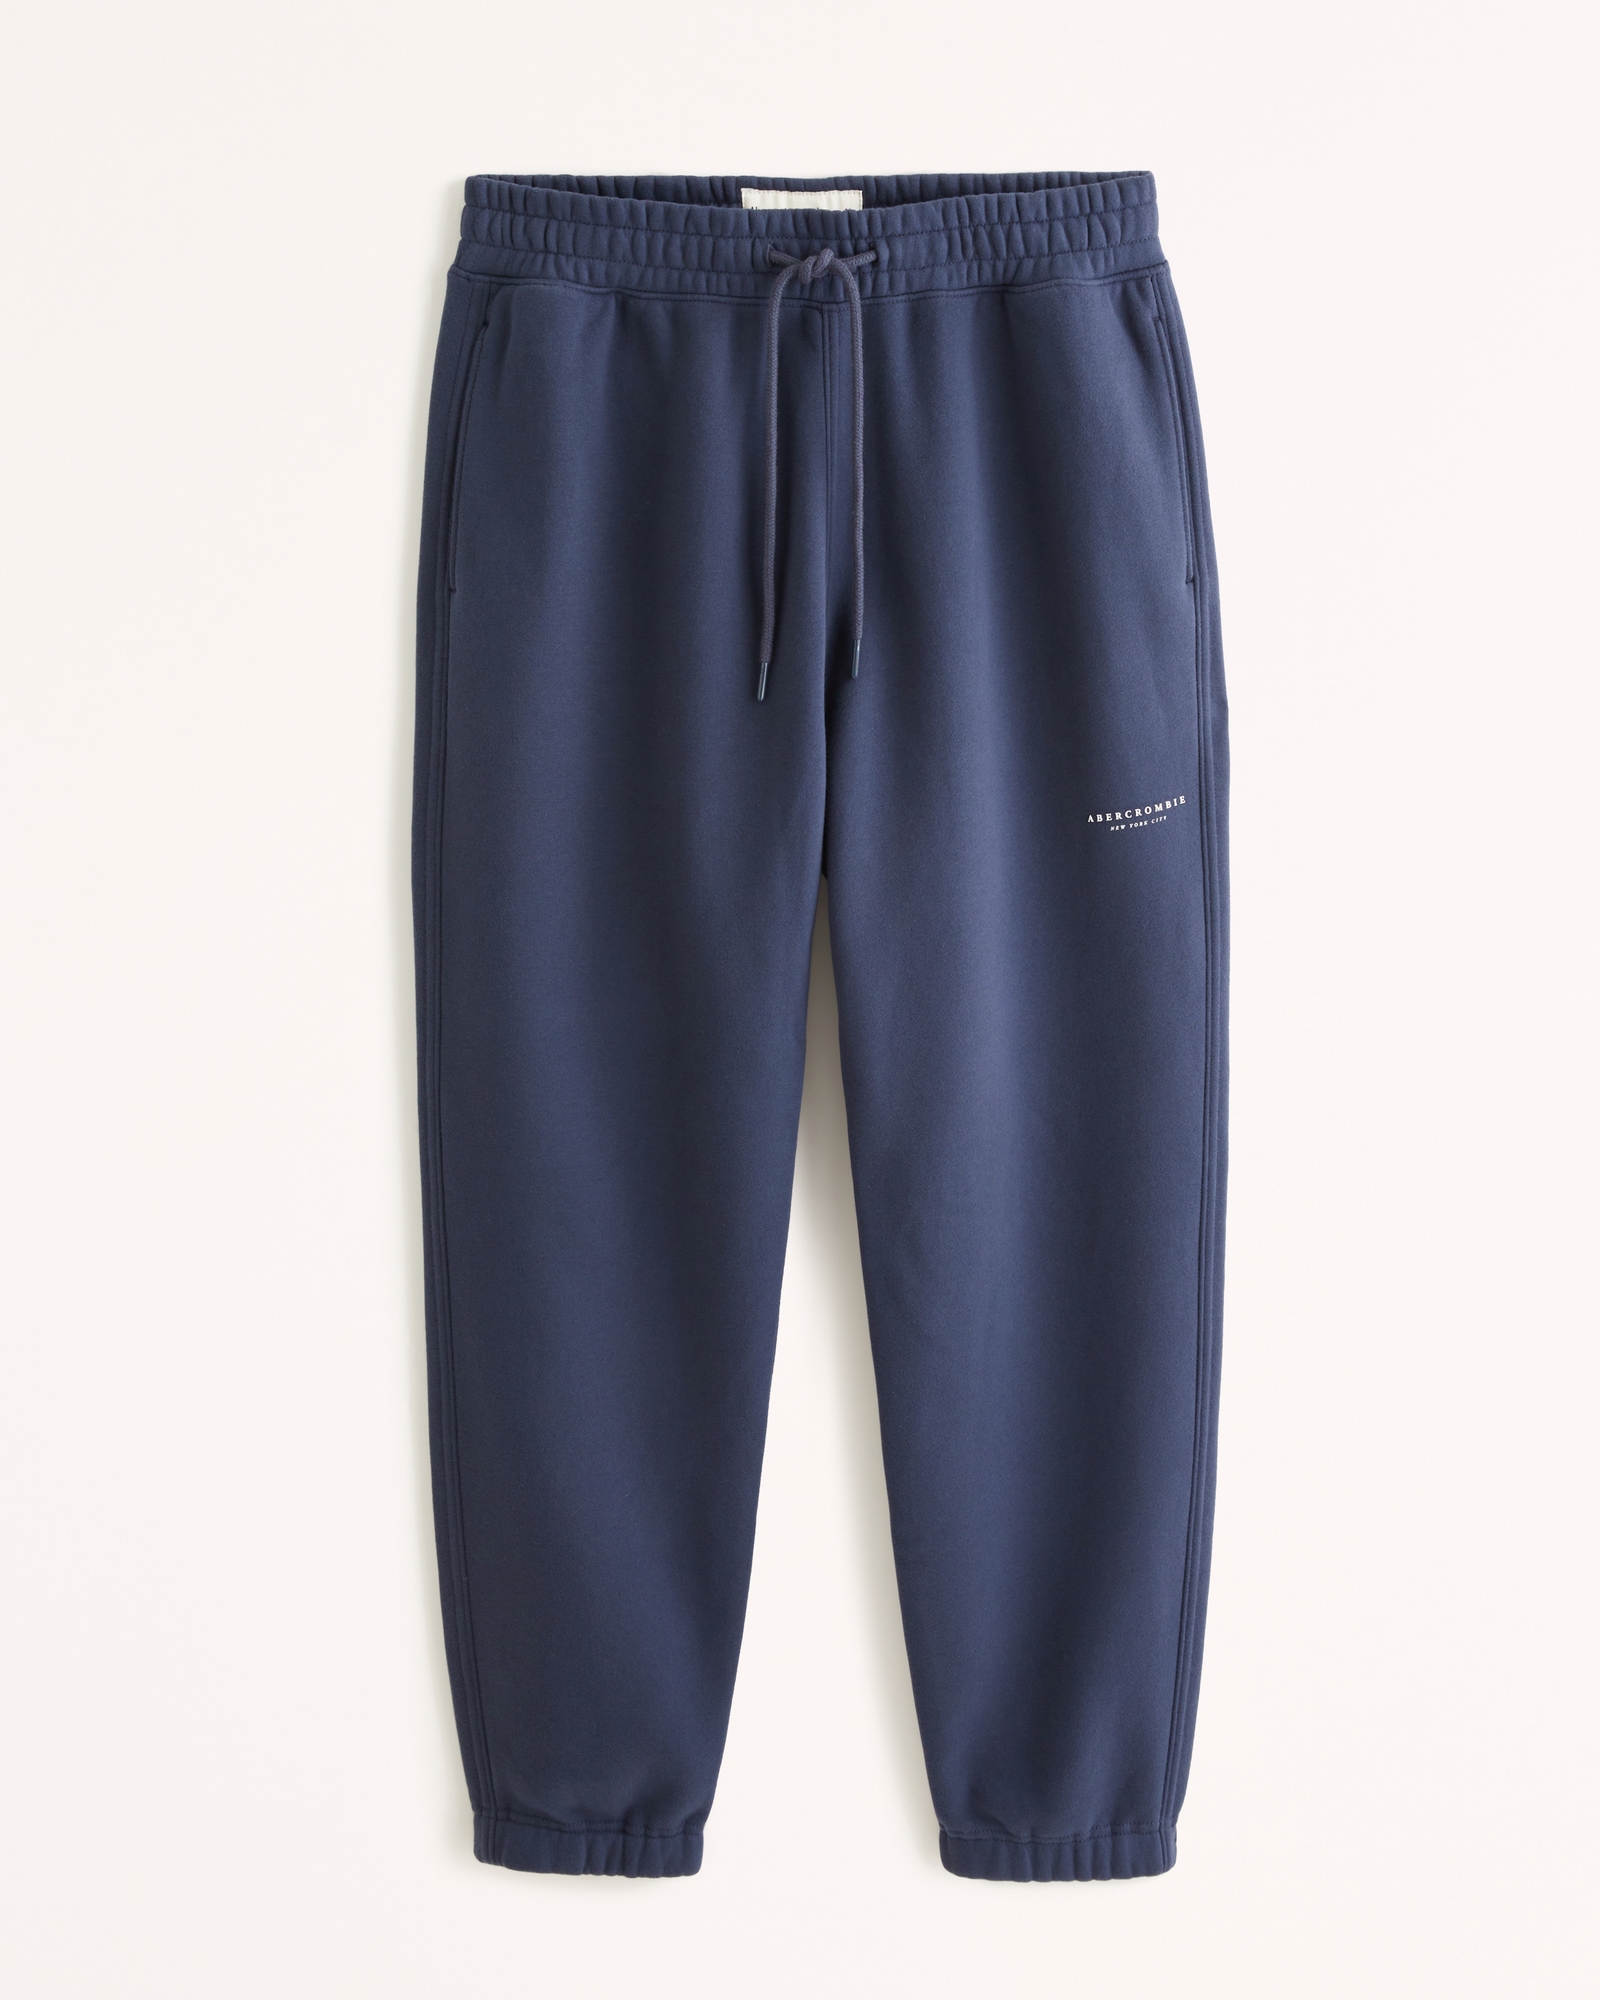 Abercrombie & Fitch Straight Sweatpants  Low Rise Navy Blue Pants - H&M  Rewear - Preowned and Sus Joggers